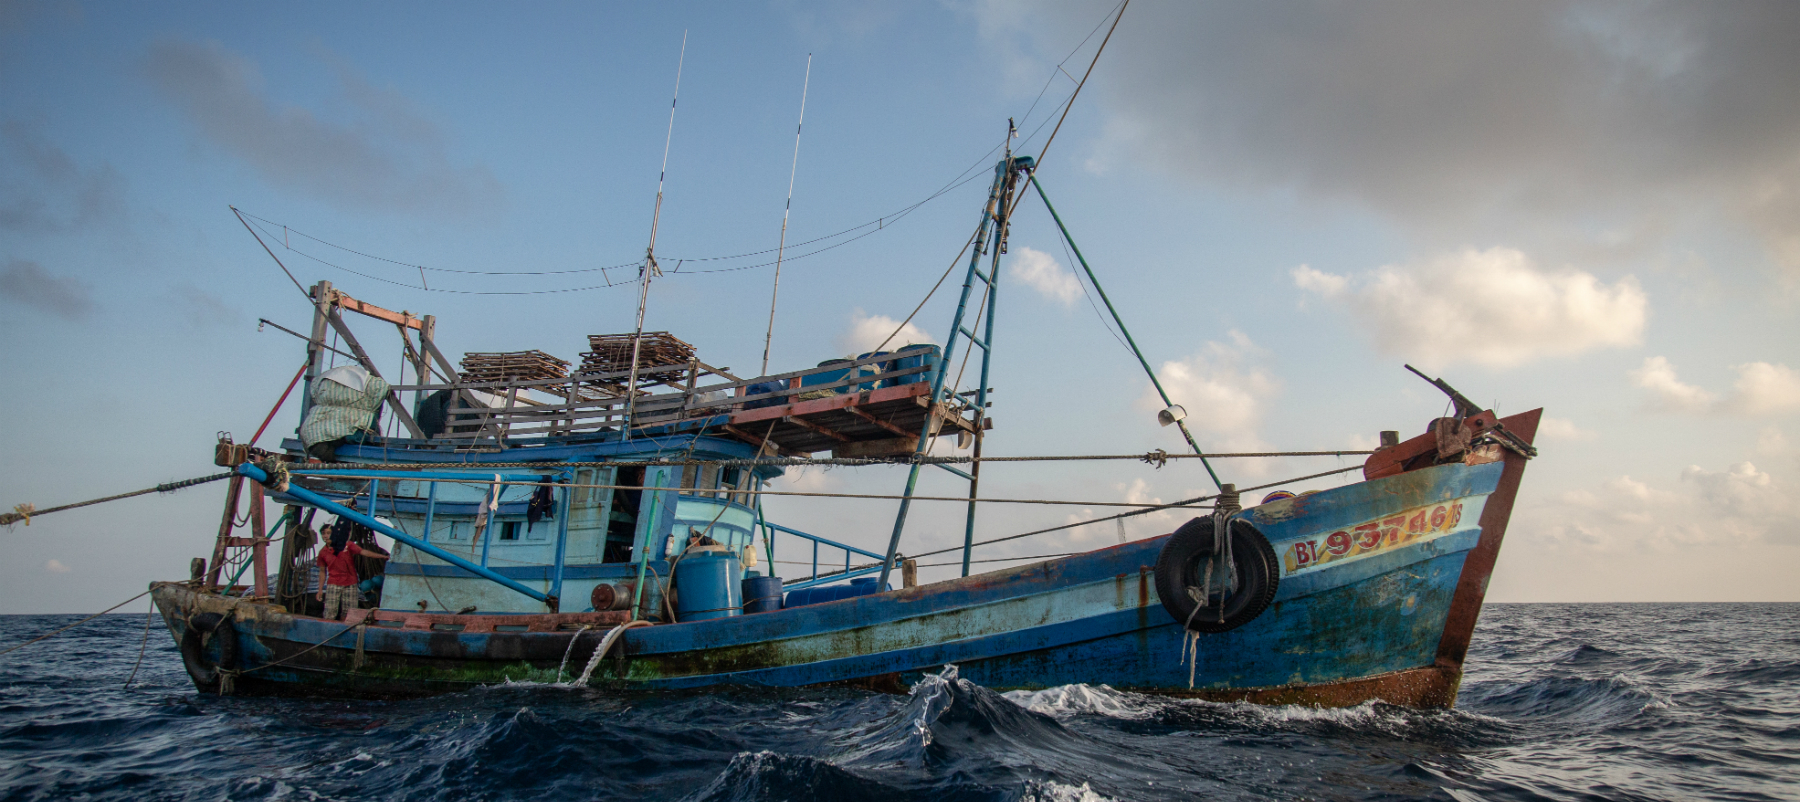 Improving Transparency in fisheries